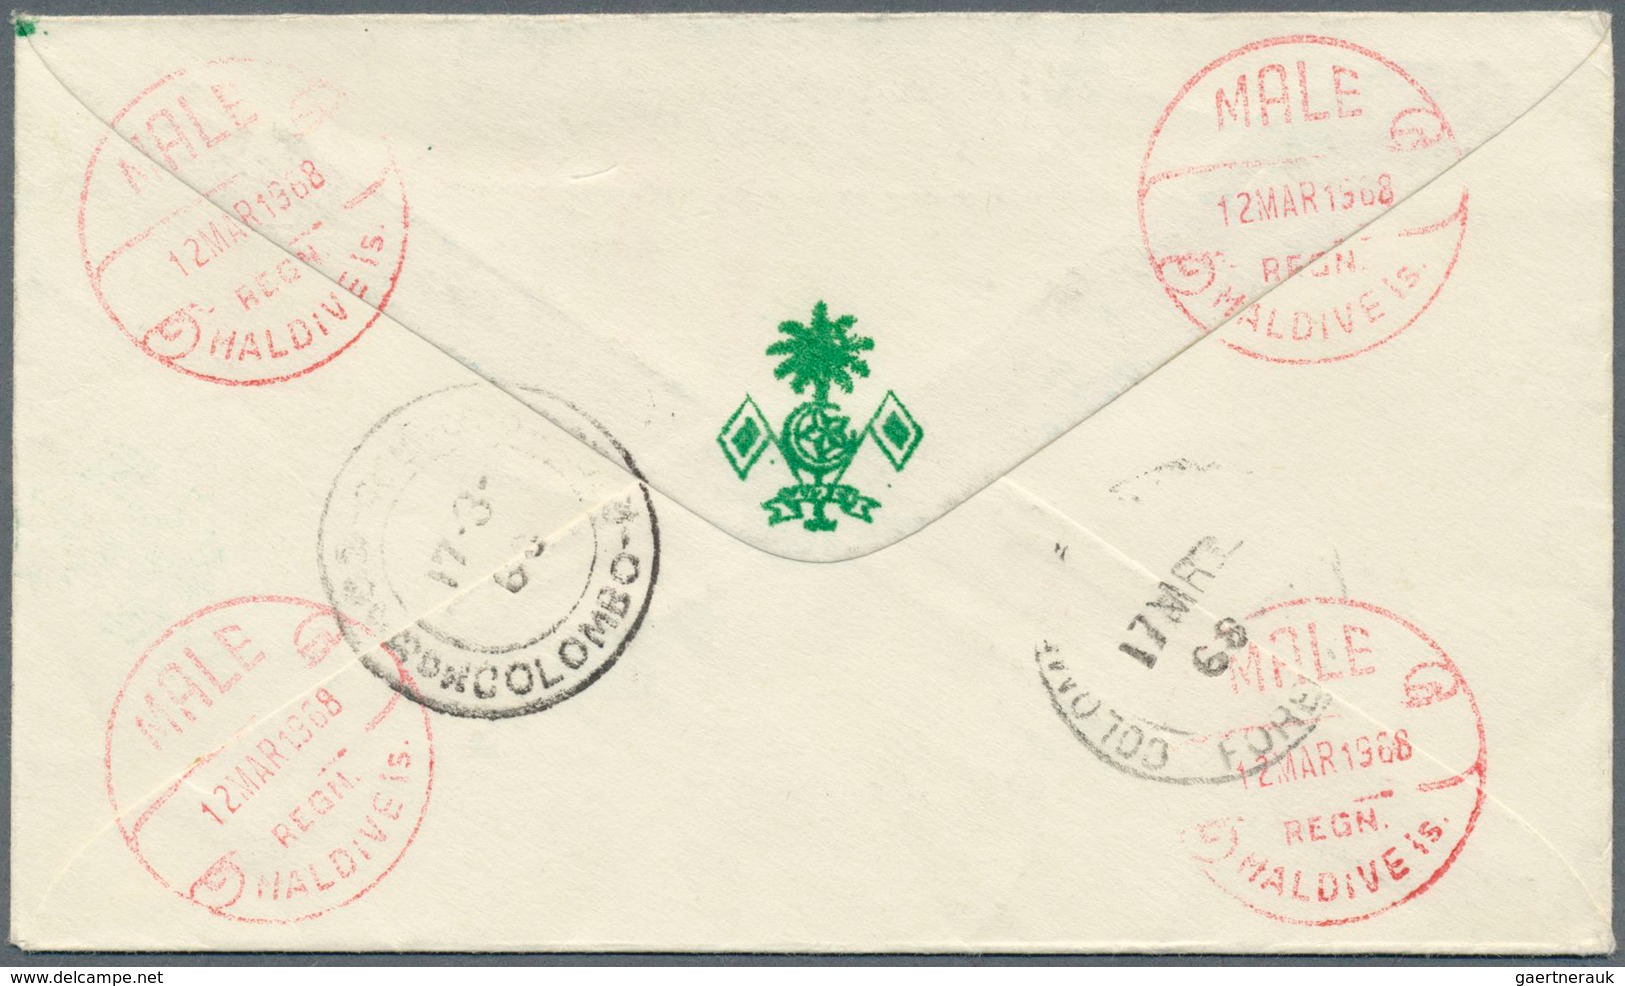 12179 Malediven: 1968, ON HIS MAJESTY'S SERVICE, Stampless Registered Airmail Cover From MALE, 12.MAR 1968 - Maldives (1965-...)